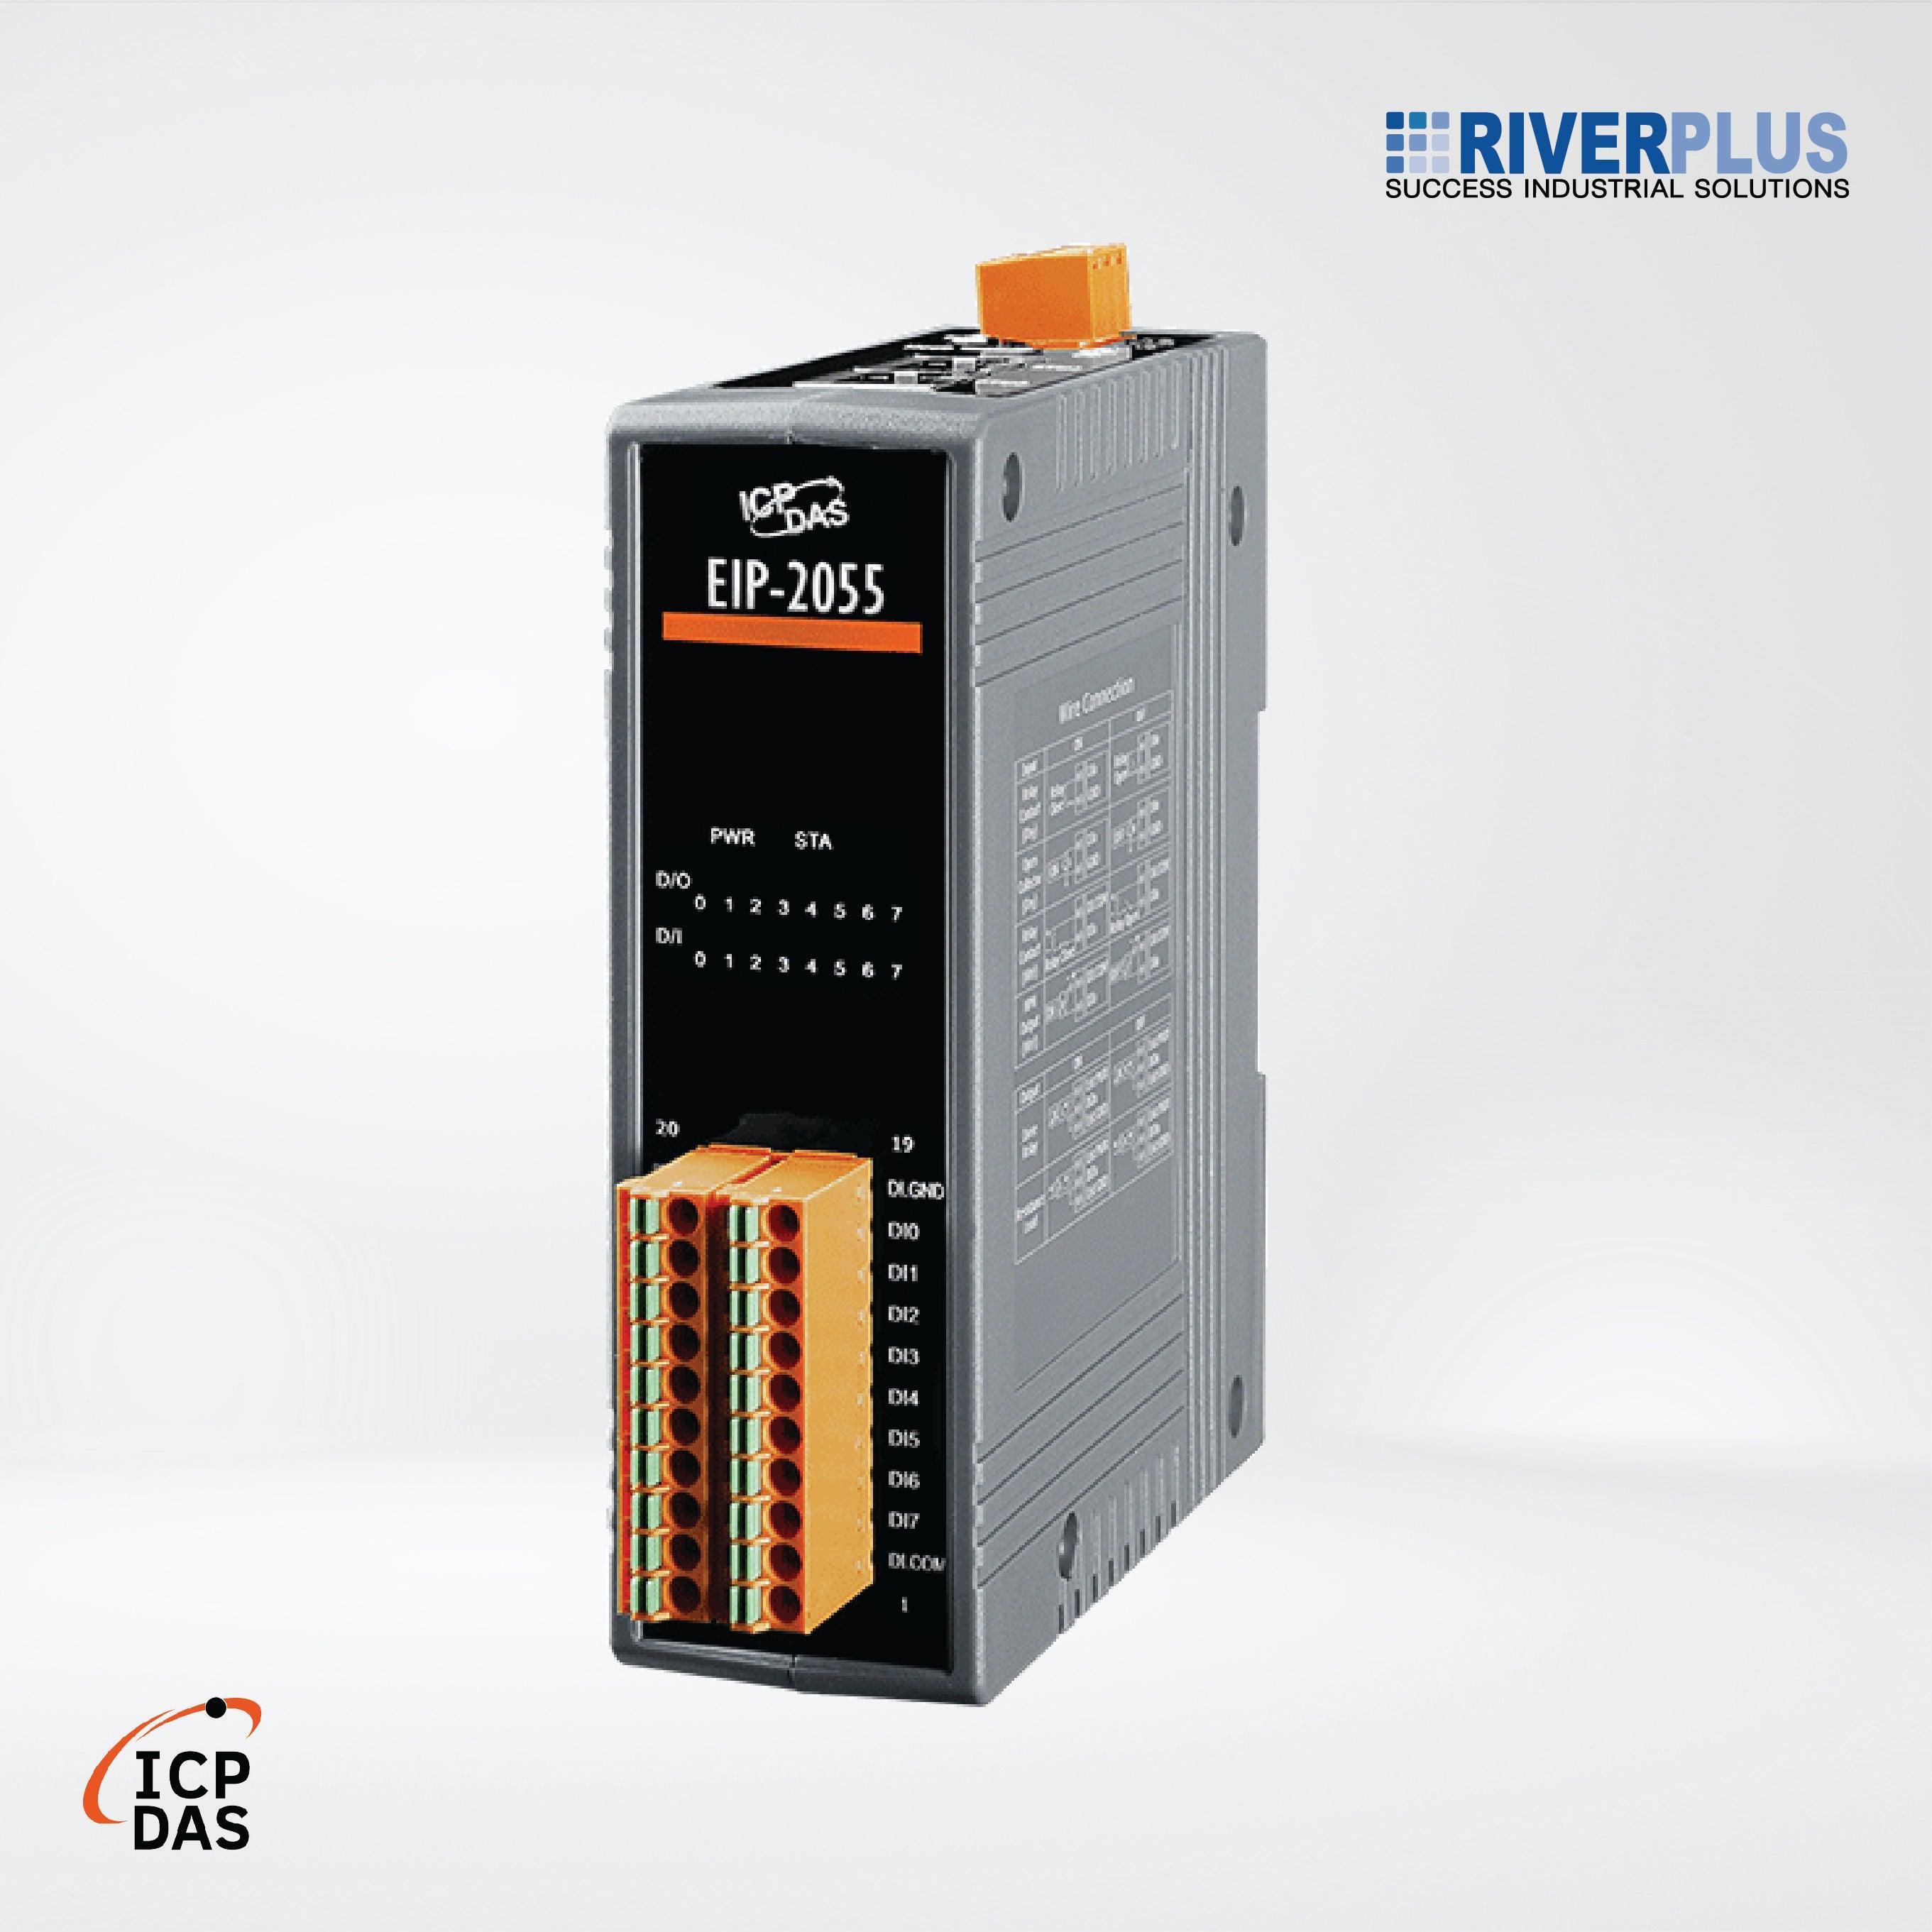 EIP-2055 EtherNet/IP Module (Isolated 8-ch DI and 8-ch DO) - Riverplus